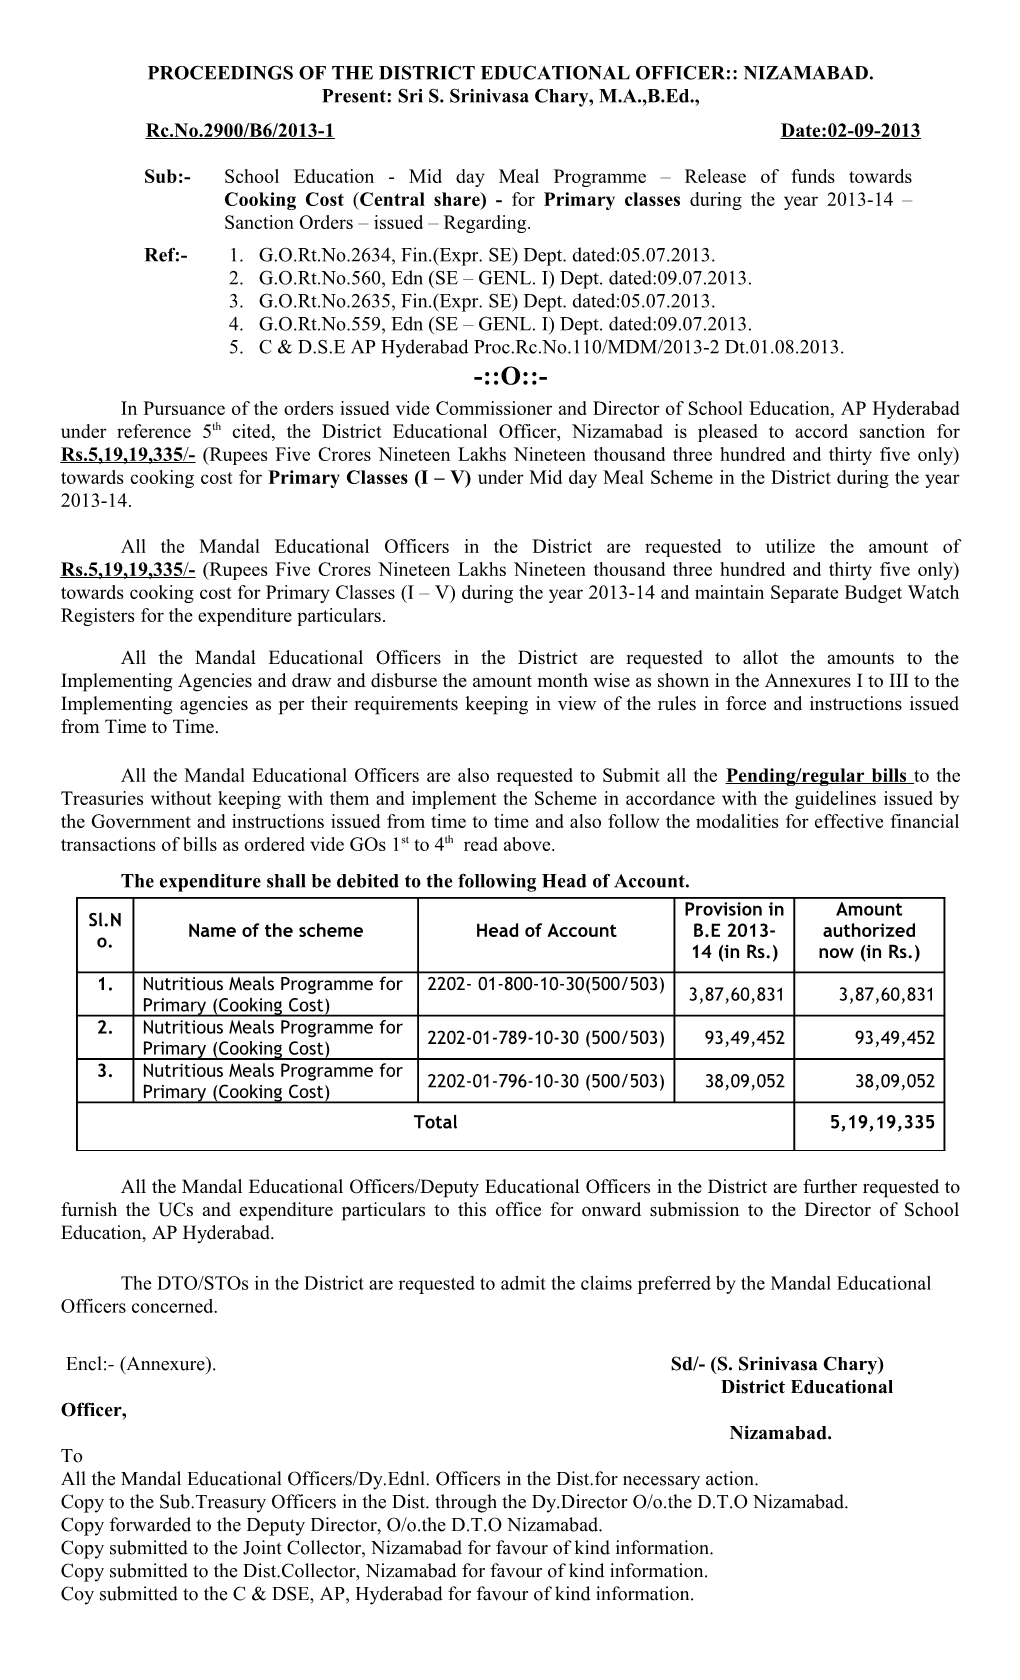 Proceedings of the District Educational Officer Nizamabad